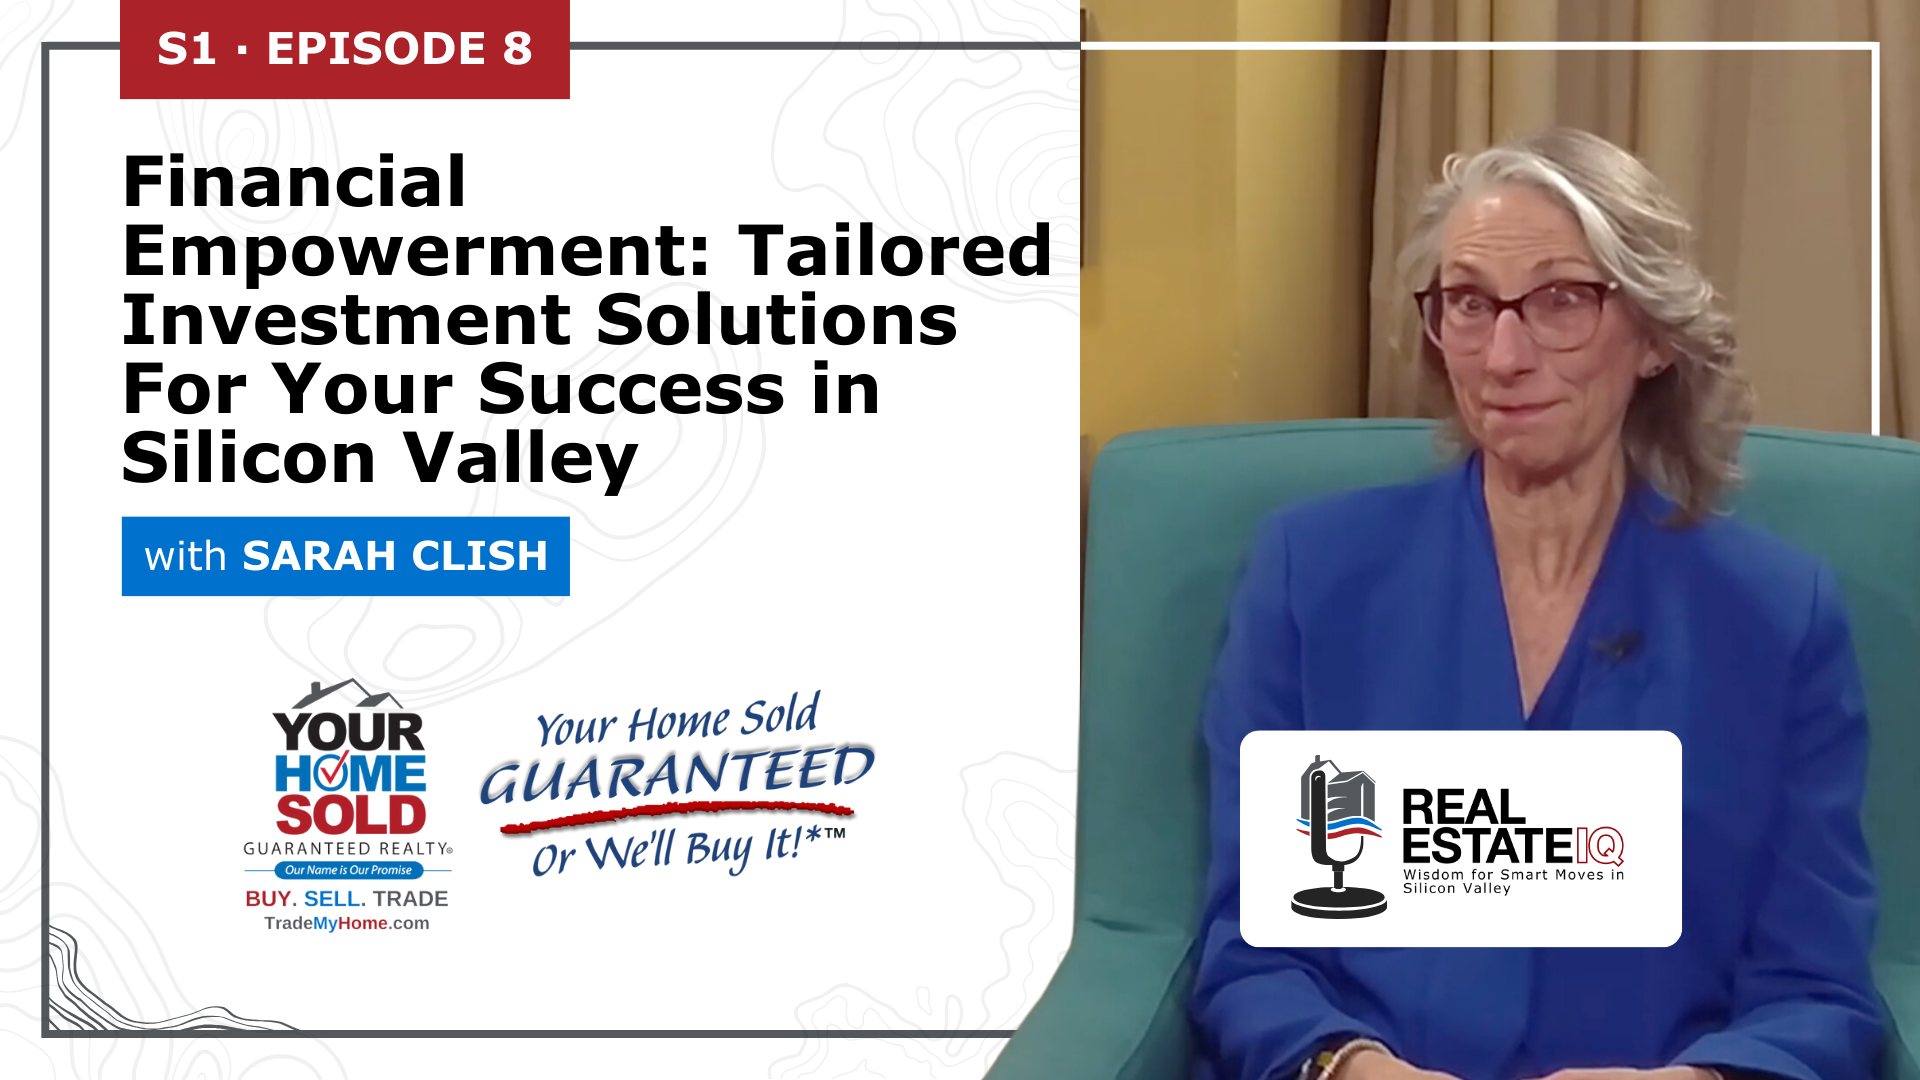 Financial Empowerment: Tailored Investment Solutions For Your Success in Silicon Valley Video